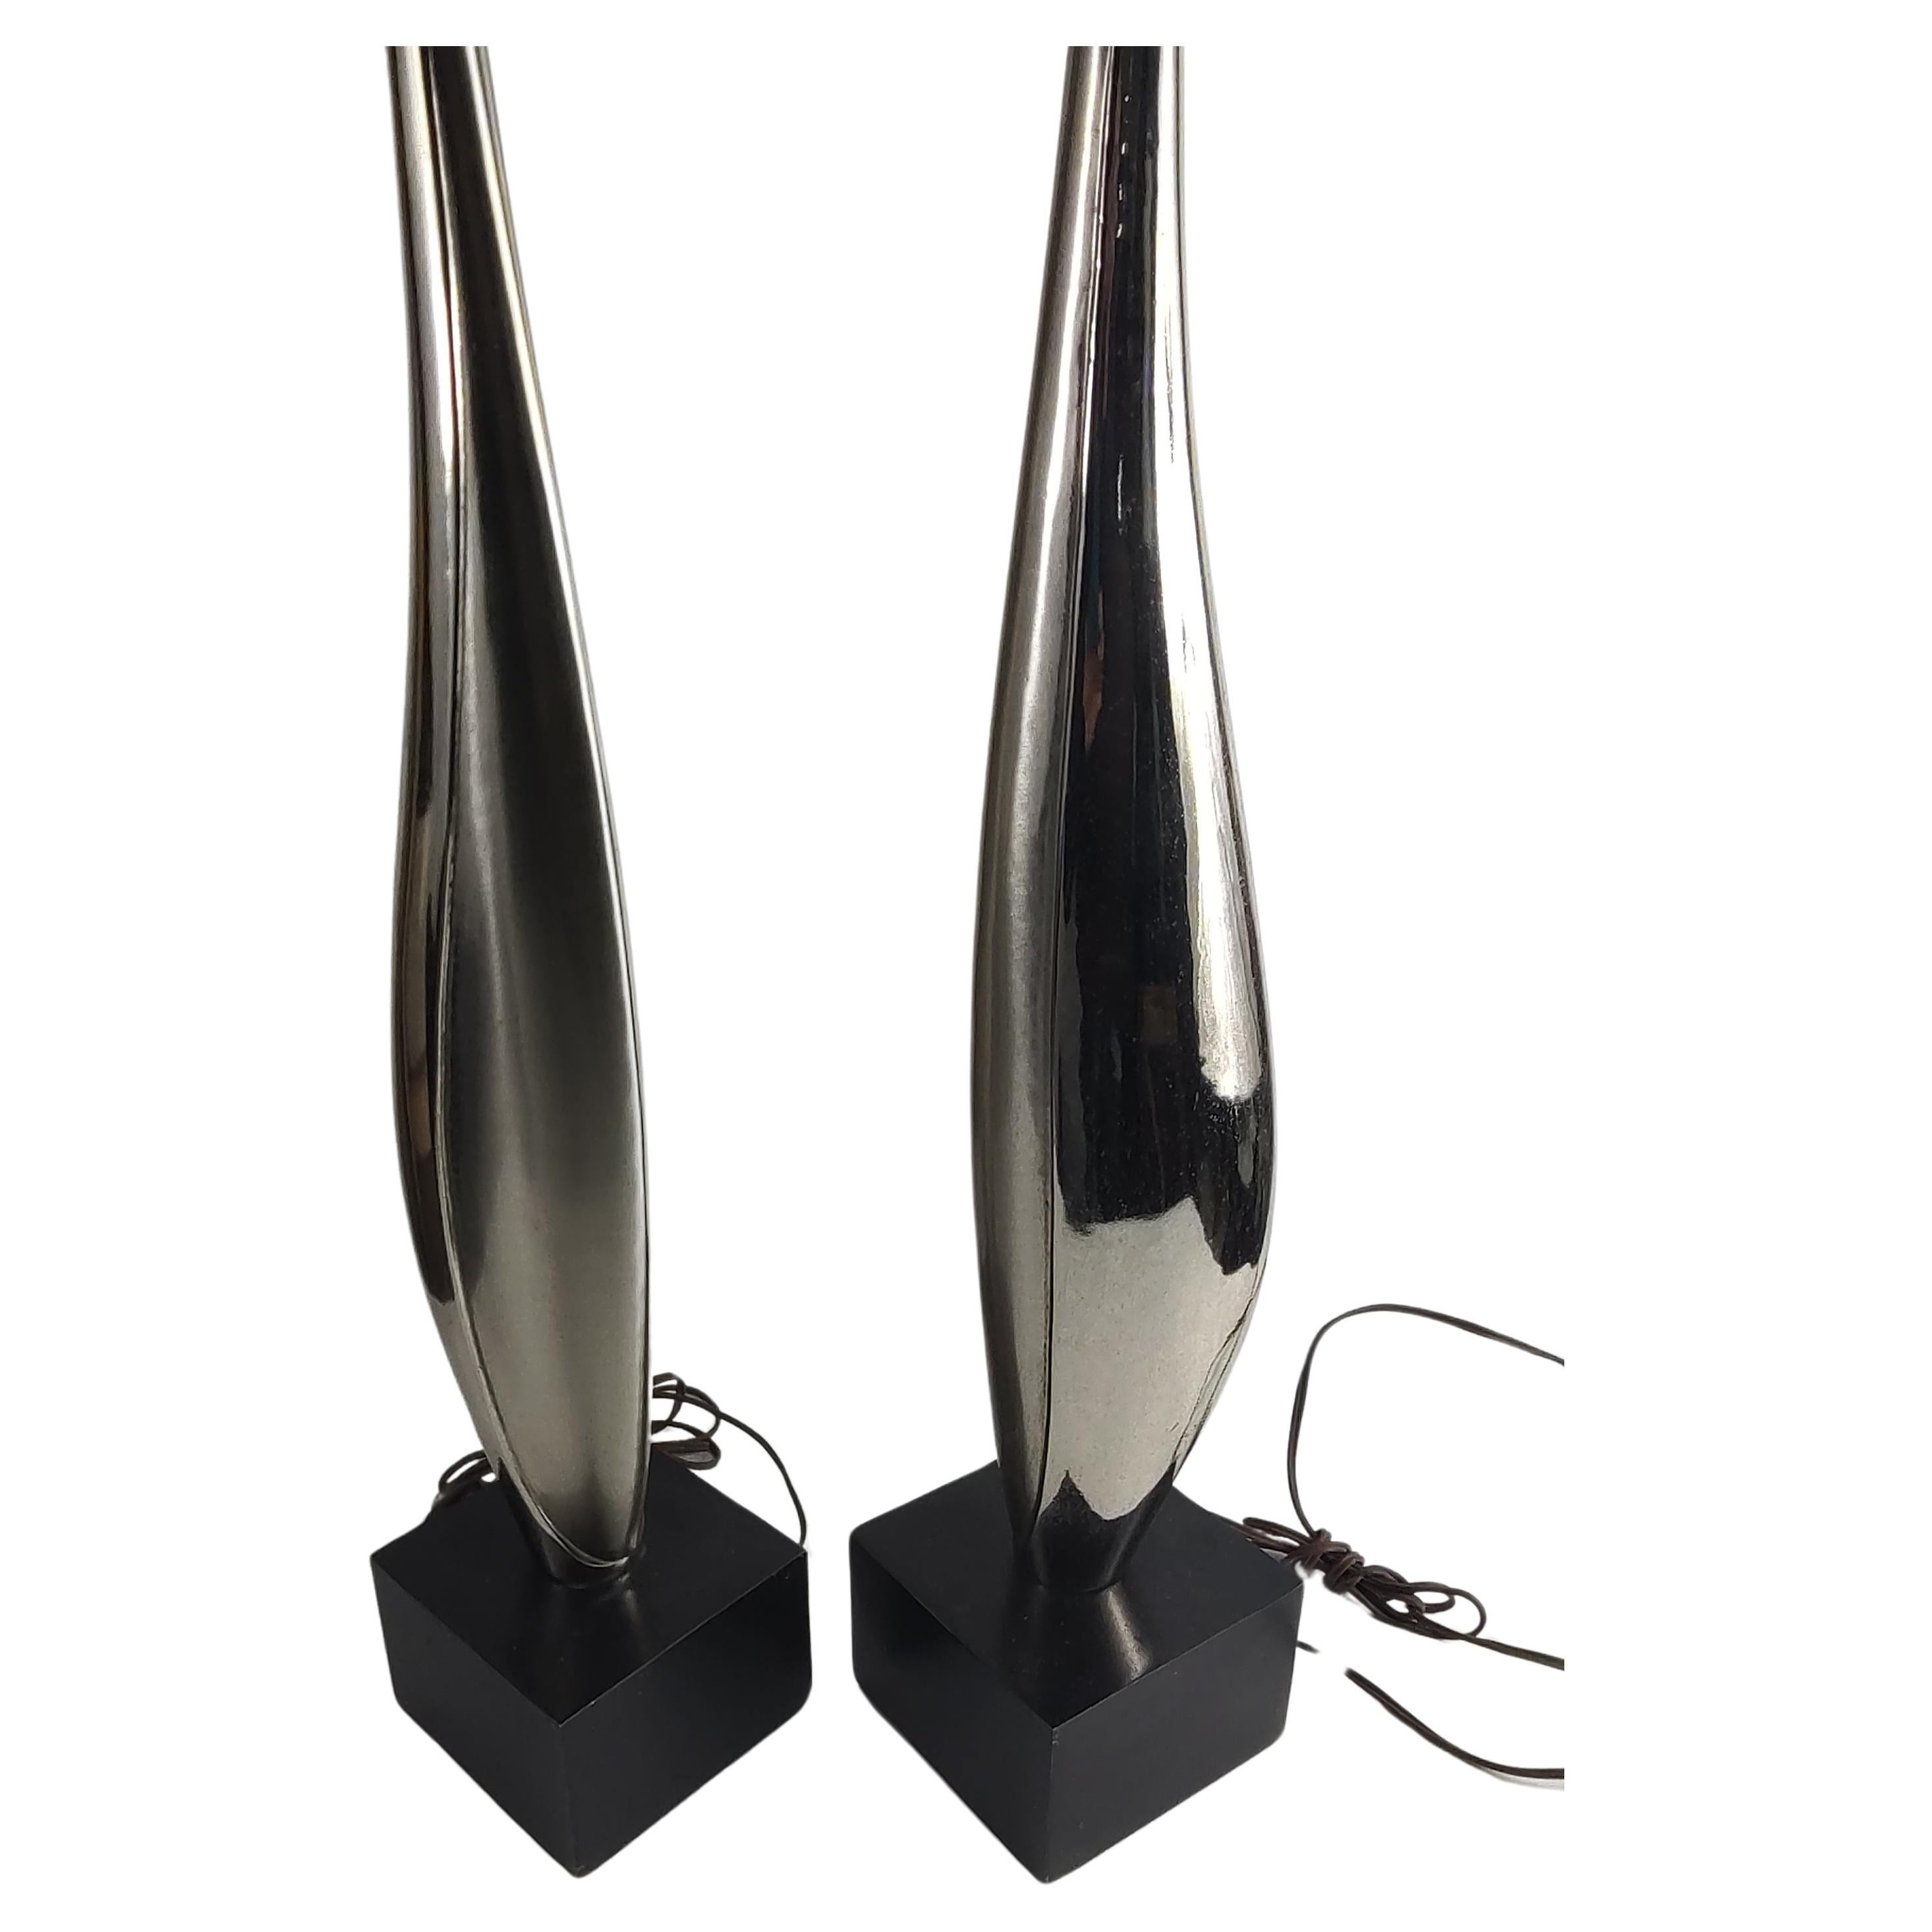 Molded Pair of Mid Century Modern Sculptural Chrome w Black Bases by Laurel Lamp Co. For Sale